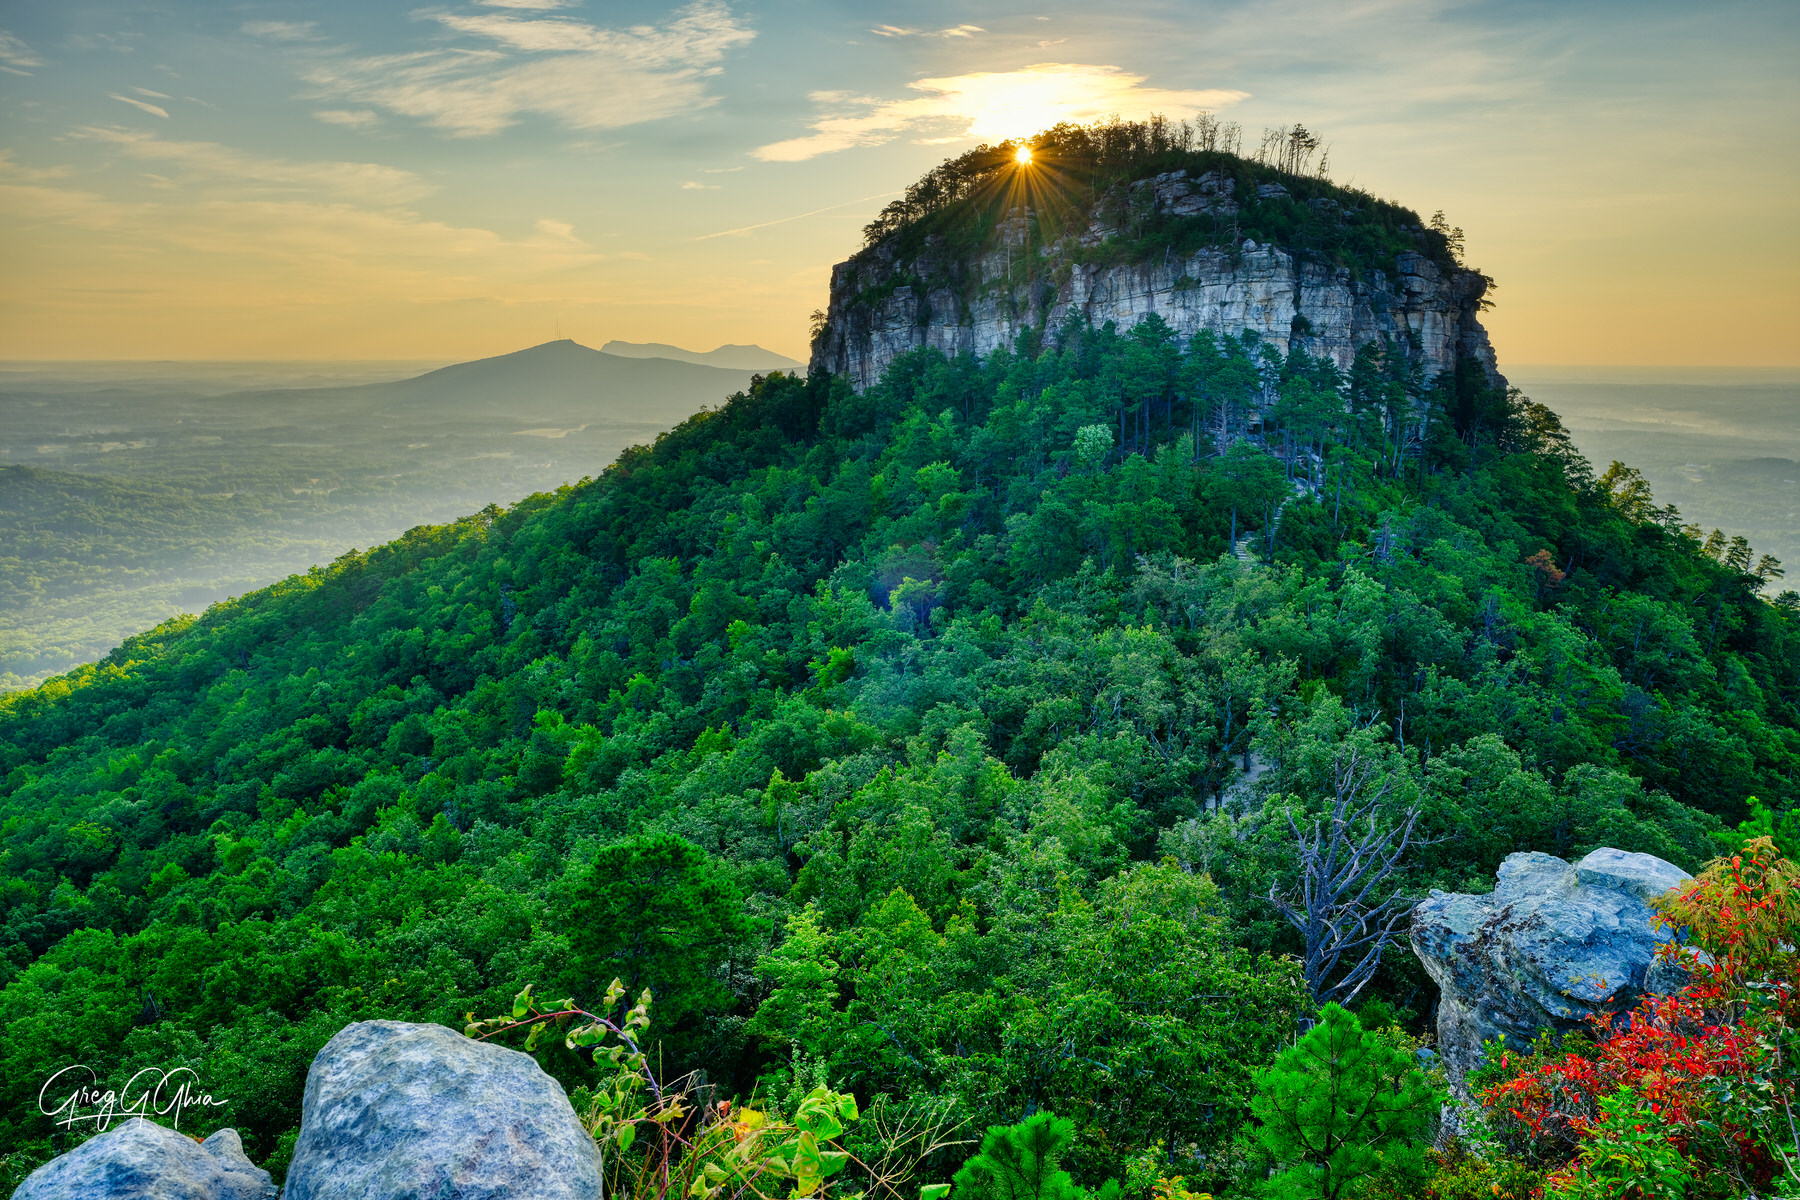 Pilot mountain covered in green foliage as the sun peers over the top and a sunburst is captured at sunrise and the mountain is bathed in warm light. 